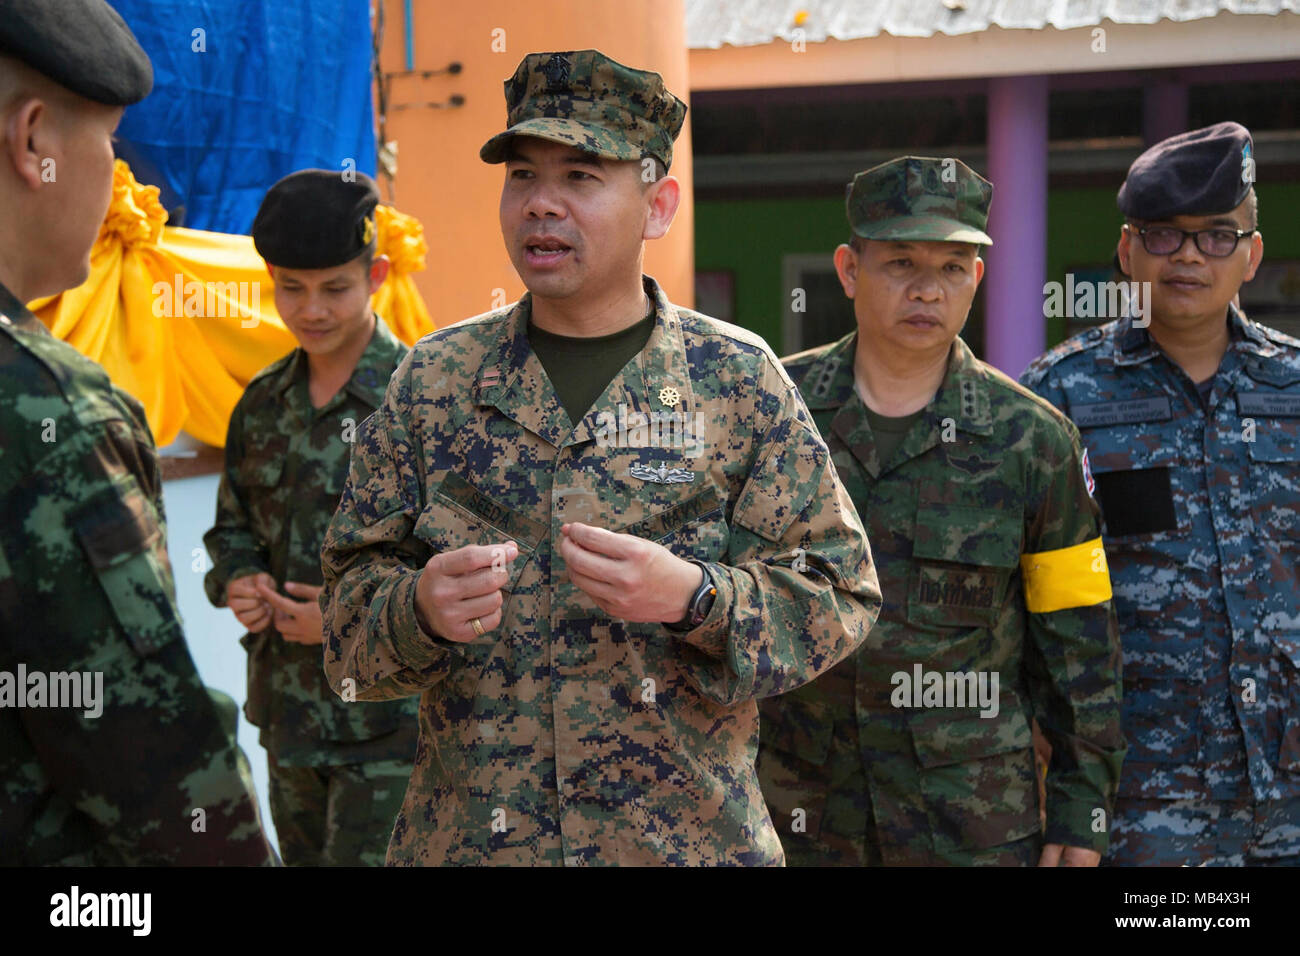 U.S. Navy Lt. Aroon Seeda speaks to the Royal Thai Army and Air Force, during Exercise Cobra Gold 2018 at Pong Ka Sang School in Nakhon Ratchasima, Kingdom of Thailand, Feb. 20, 2018. Chaplain Seeda was Born and raised in Pluak Daeng, Rayong province, Kingdom of Thailand as a Buddhist monk and immigrated to the United States in 2001 before joining the Navy Reserve in 2008. Humanitarian civic assistance projects conducted during the exercise support the needs and humanitarian interests of the Thai people. Cobra Gold 18 is an annual exercise conducted in the Kingdom of Thailand and runs from Feb Stock Photo